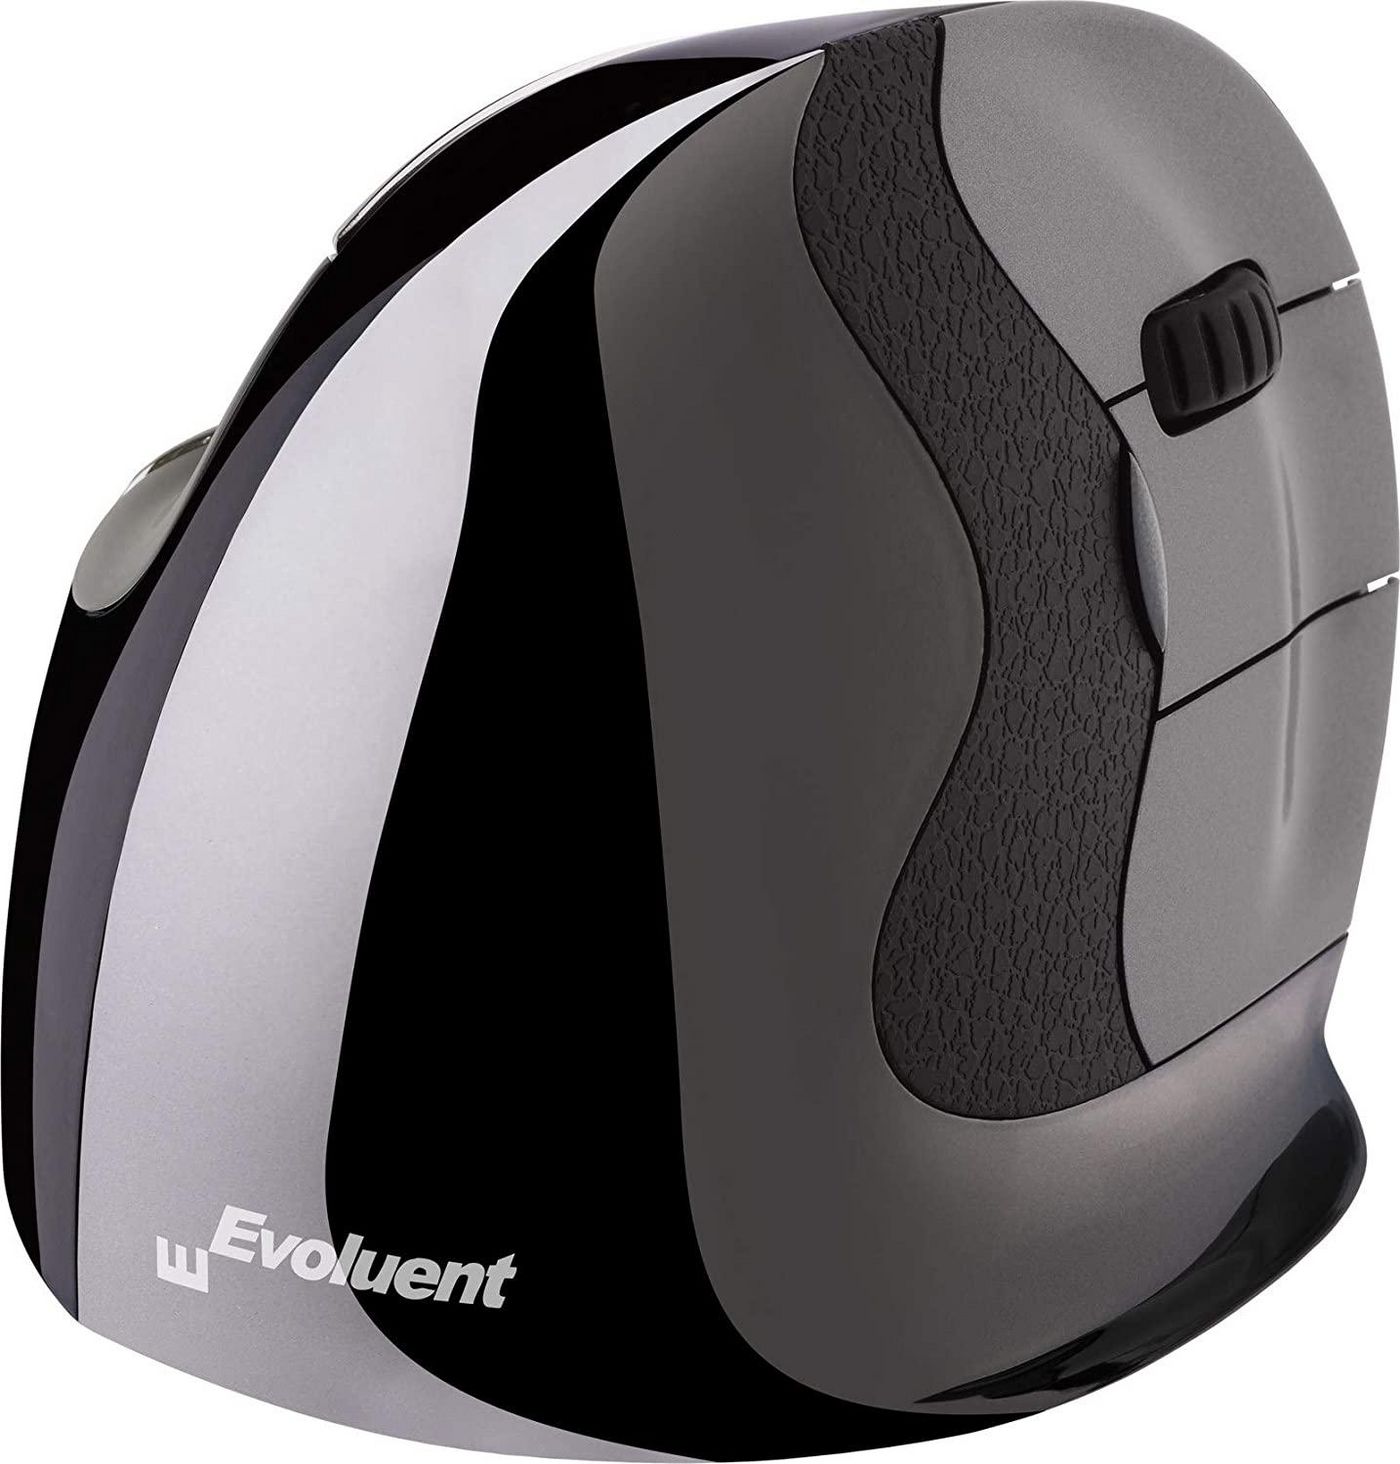 Evoluent VMDMW W125866248 Vertical Mouse D Right hand, 